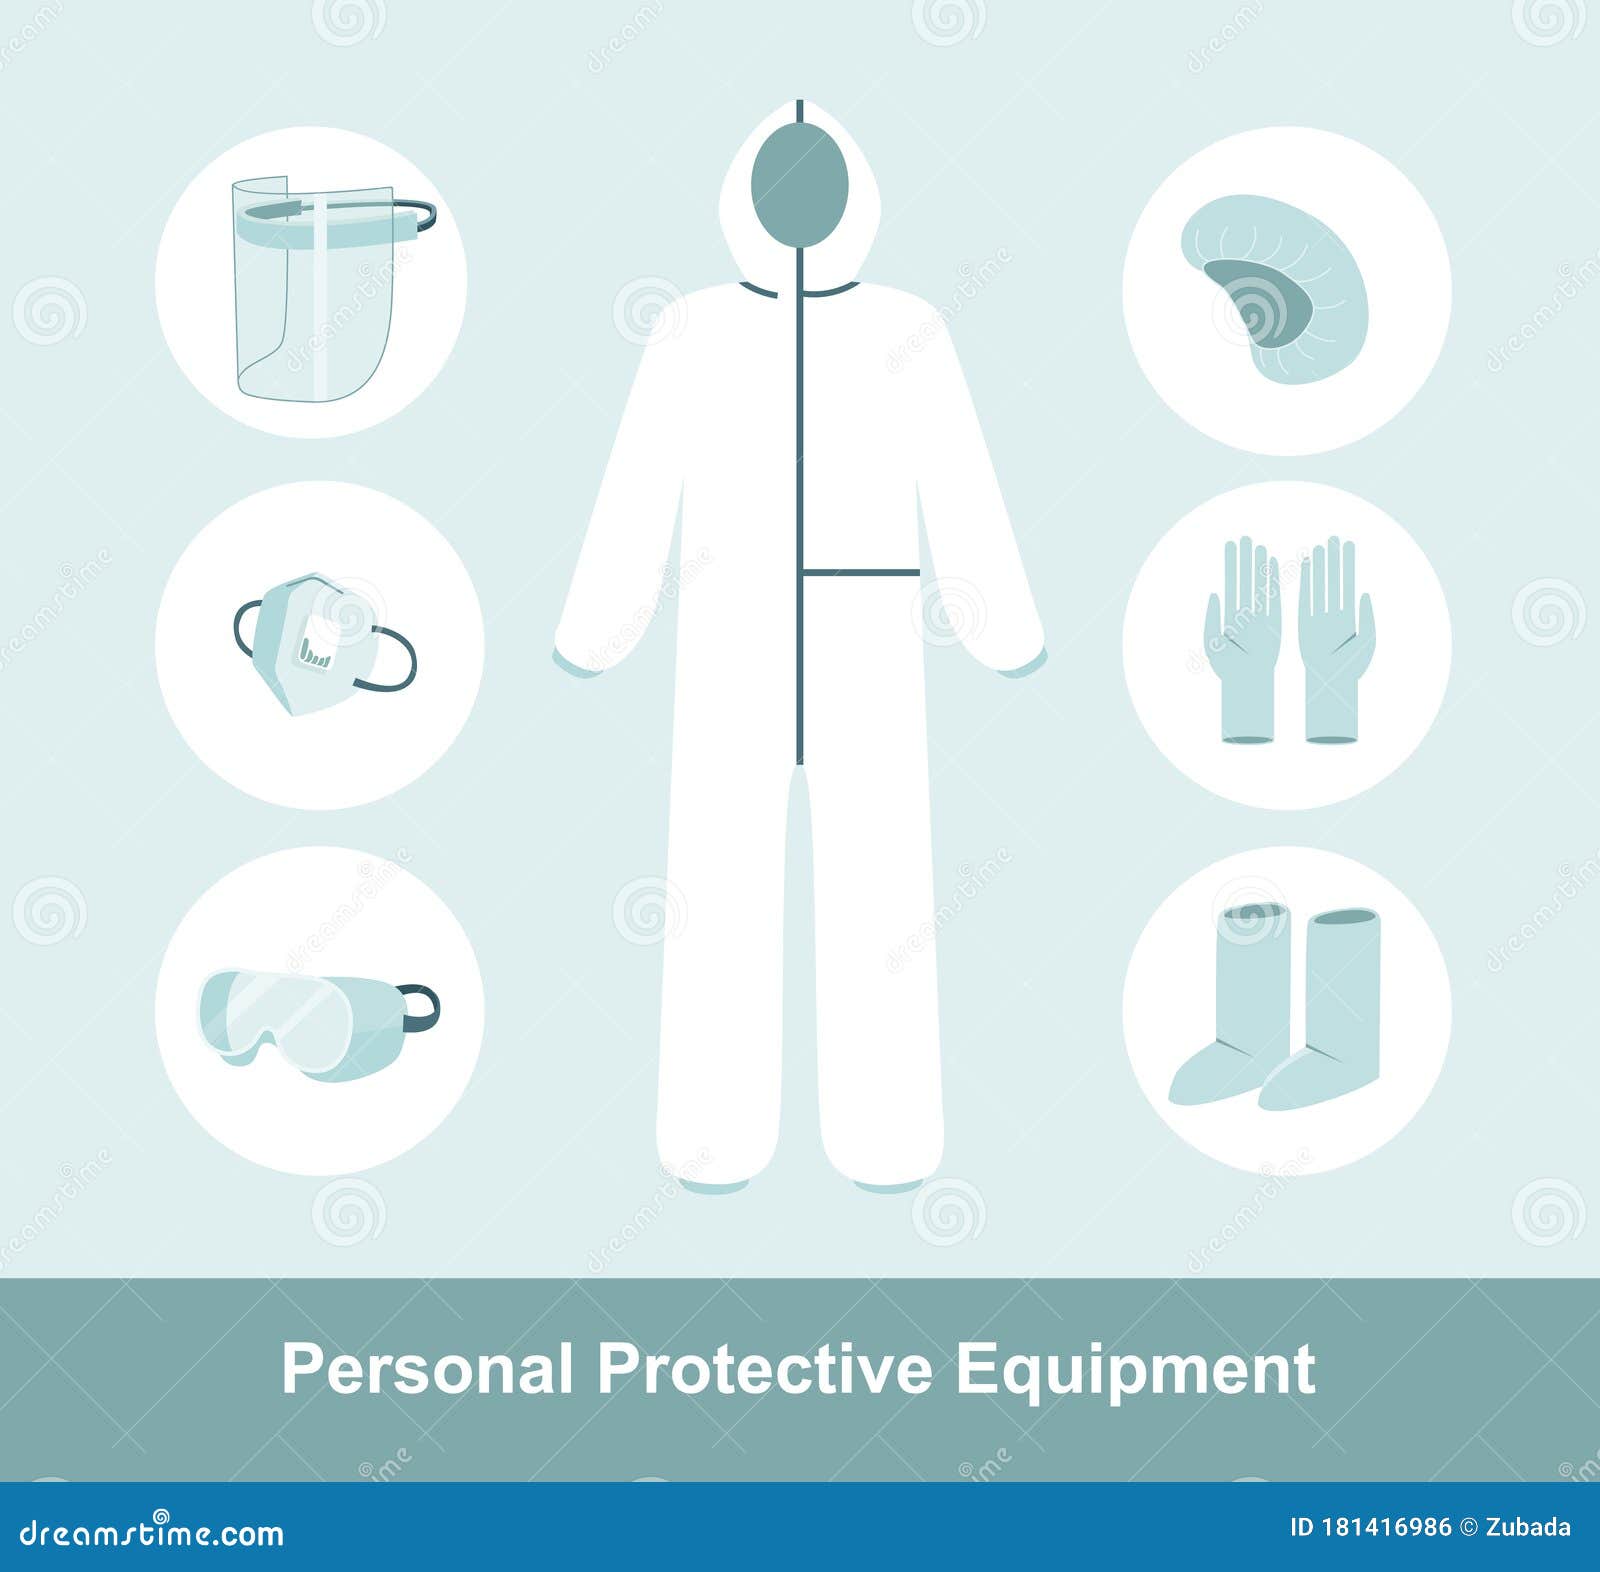 ppe personal protective equipment for airborne contaminants.complete protection kit full body medical coverall suit. flat 